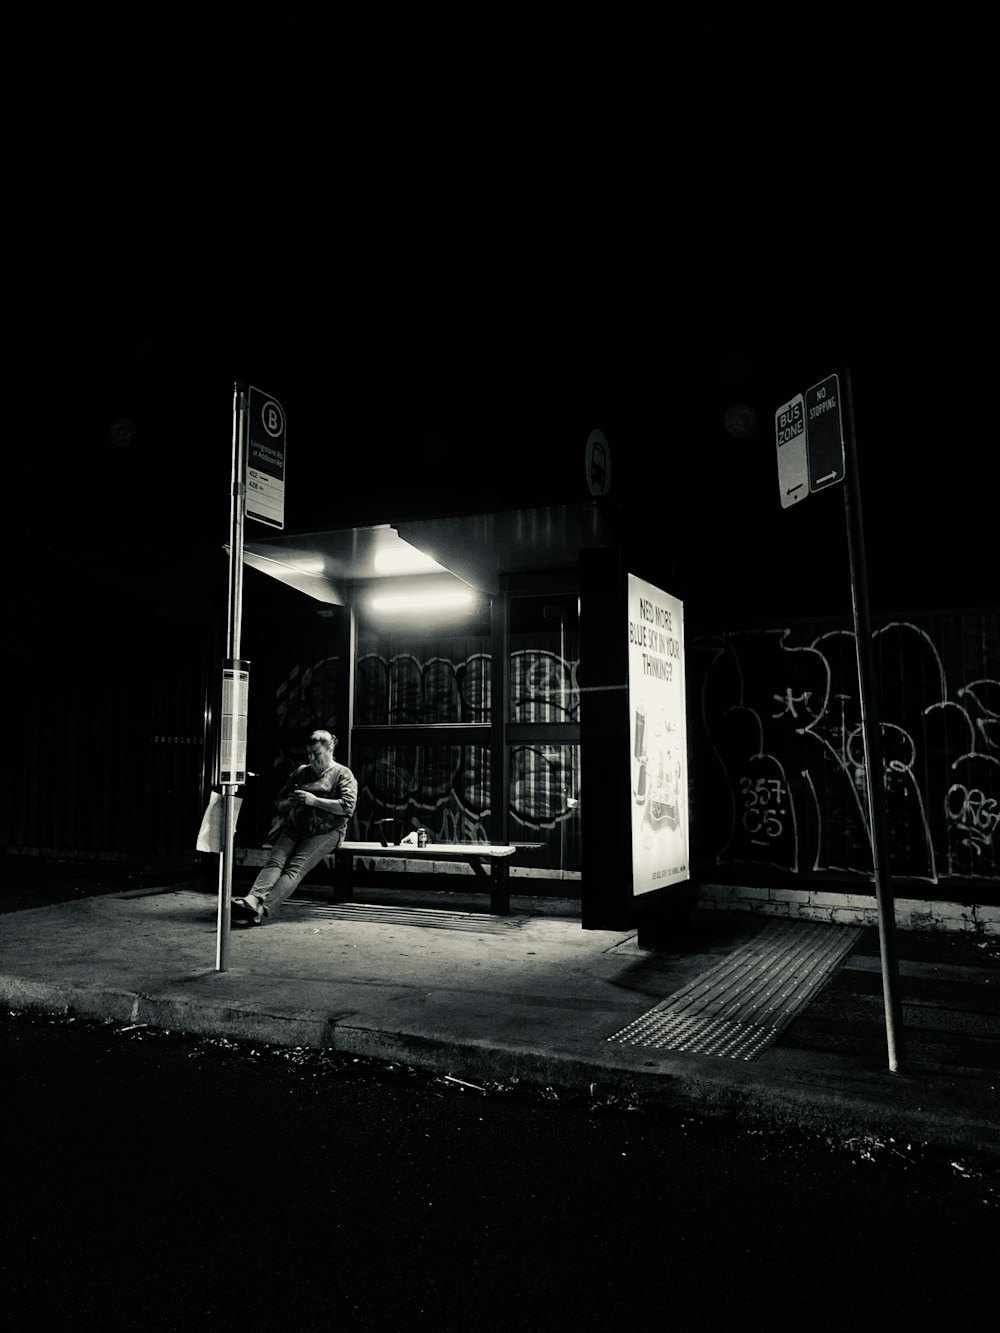 man in black jacket and pants sitting on bench near street light during night time